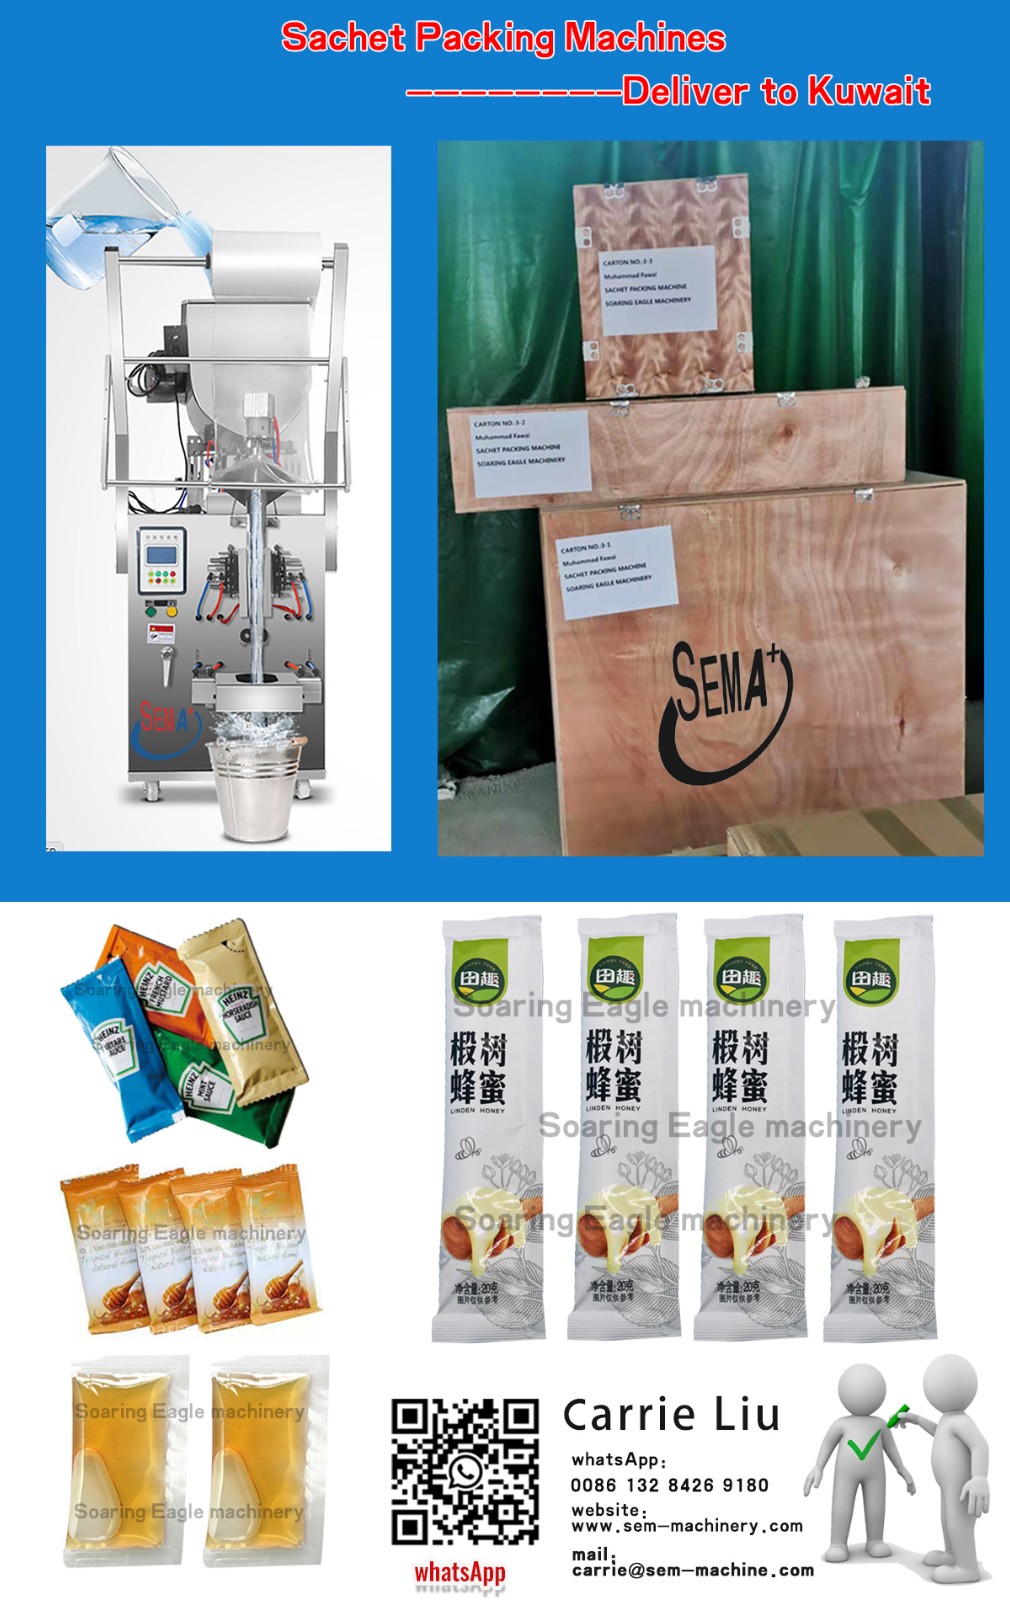 Sachet packing machine ——Deliver to Kuwait